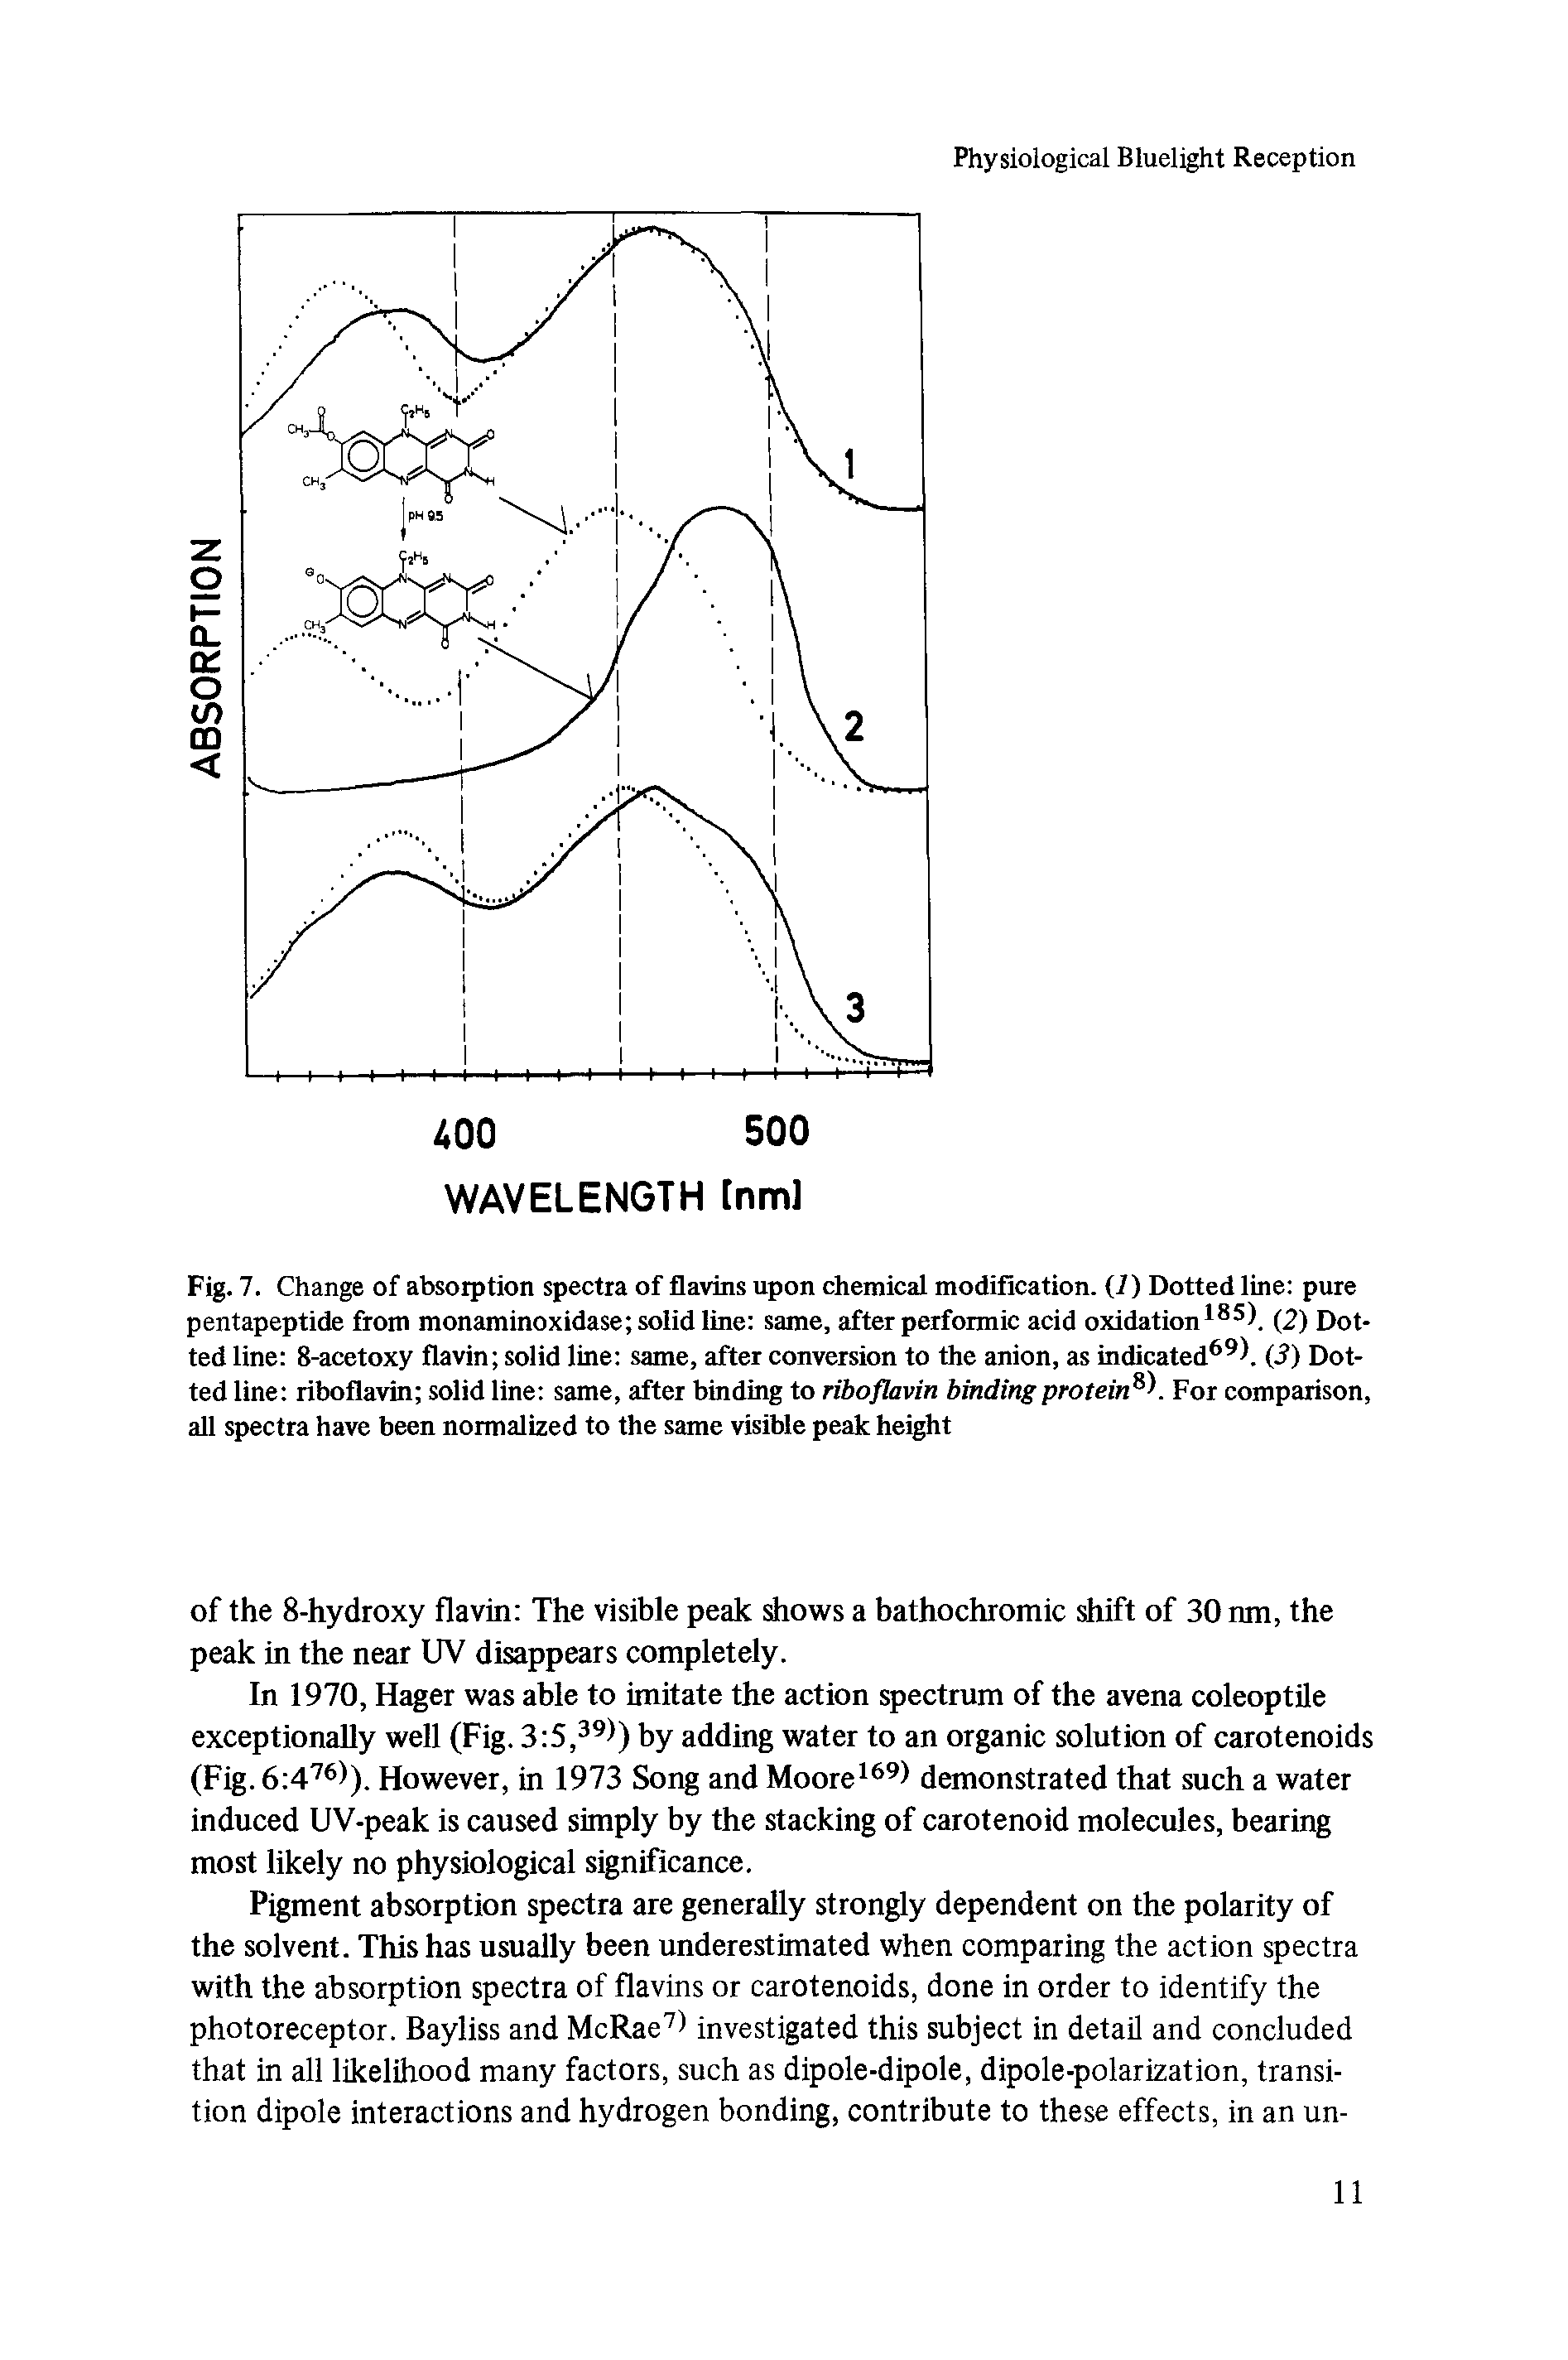 Fig. 7. Change of absorption spectra of flavins upon chemical modification. (7) Dotted line pure pentapeptide from monaminoxidase solid line same, after performic acid oxidation185). (2) Dotted line 8-acetoxy flavin solid line same, after conversion to the anion, as indicated69). (2) Dotted line riboflavin solid line same, after binding to riboflavin binding protein8). For comparison, all spectra have been normalized to the same visible peak height...